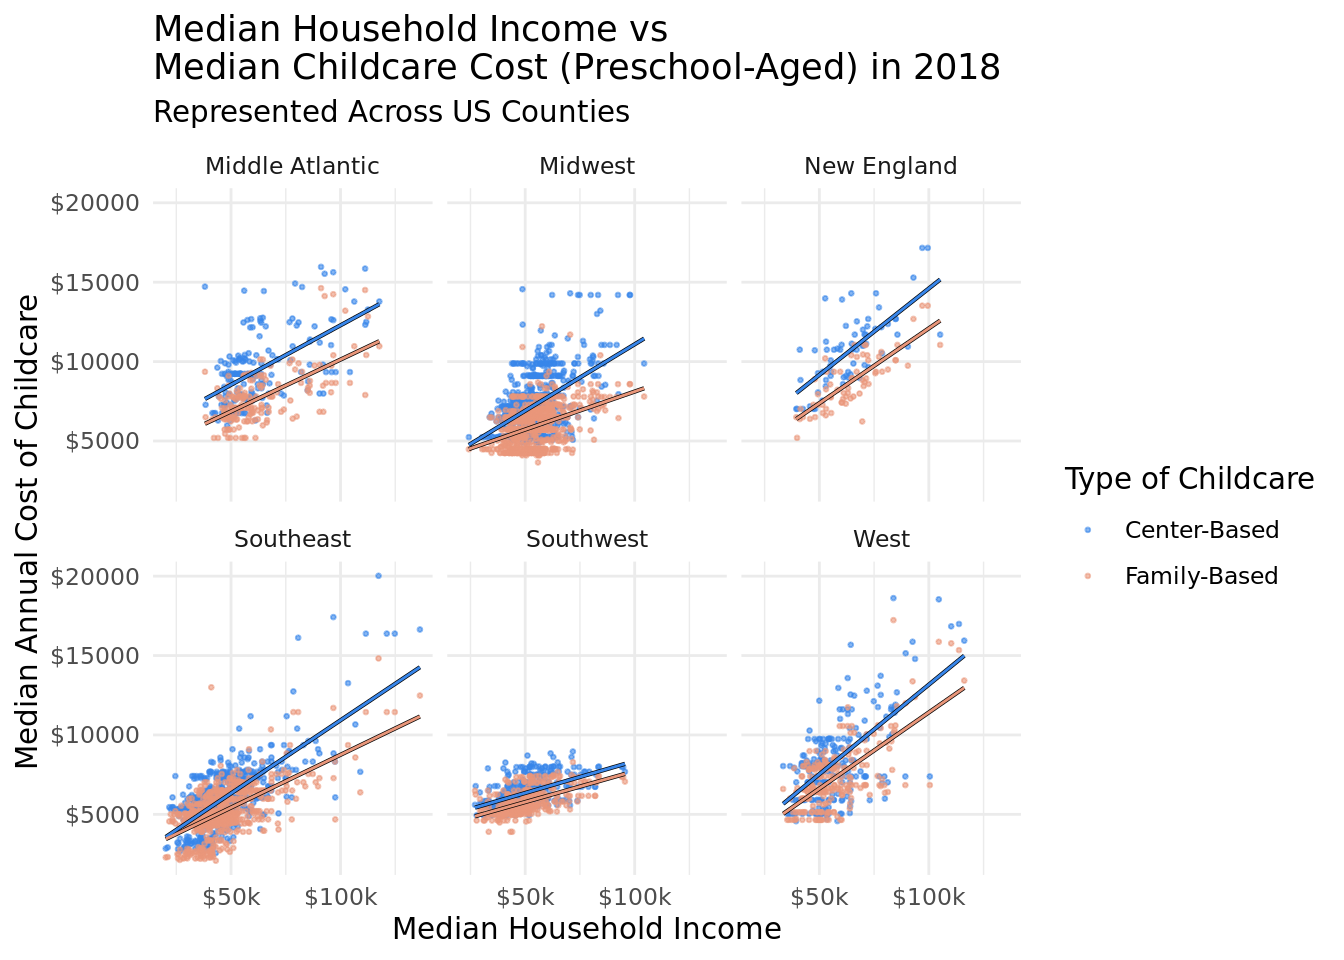 Median Household Income vs. Median Pre-k aged Childcare costs for Center-based and Family-based care, faceted across 6 regions of the U.S (Middle Atlantic, Midwest, New England, Southeast, Southwest, West), in the year 2018. There is a positive correlation between median income and childcare cost for both Center-based and Family-based care across all regions. The slope of the center-based regression line and family-based regression line appear parallel in the Middle Atlantic, New England, and Southwest, while in the Midwest, Southeast, and West, the slope for family-based care is less steep than center-based.